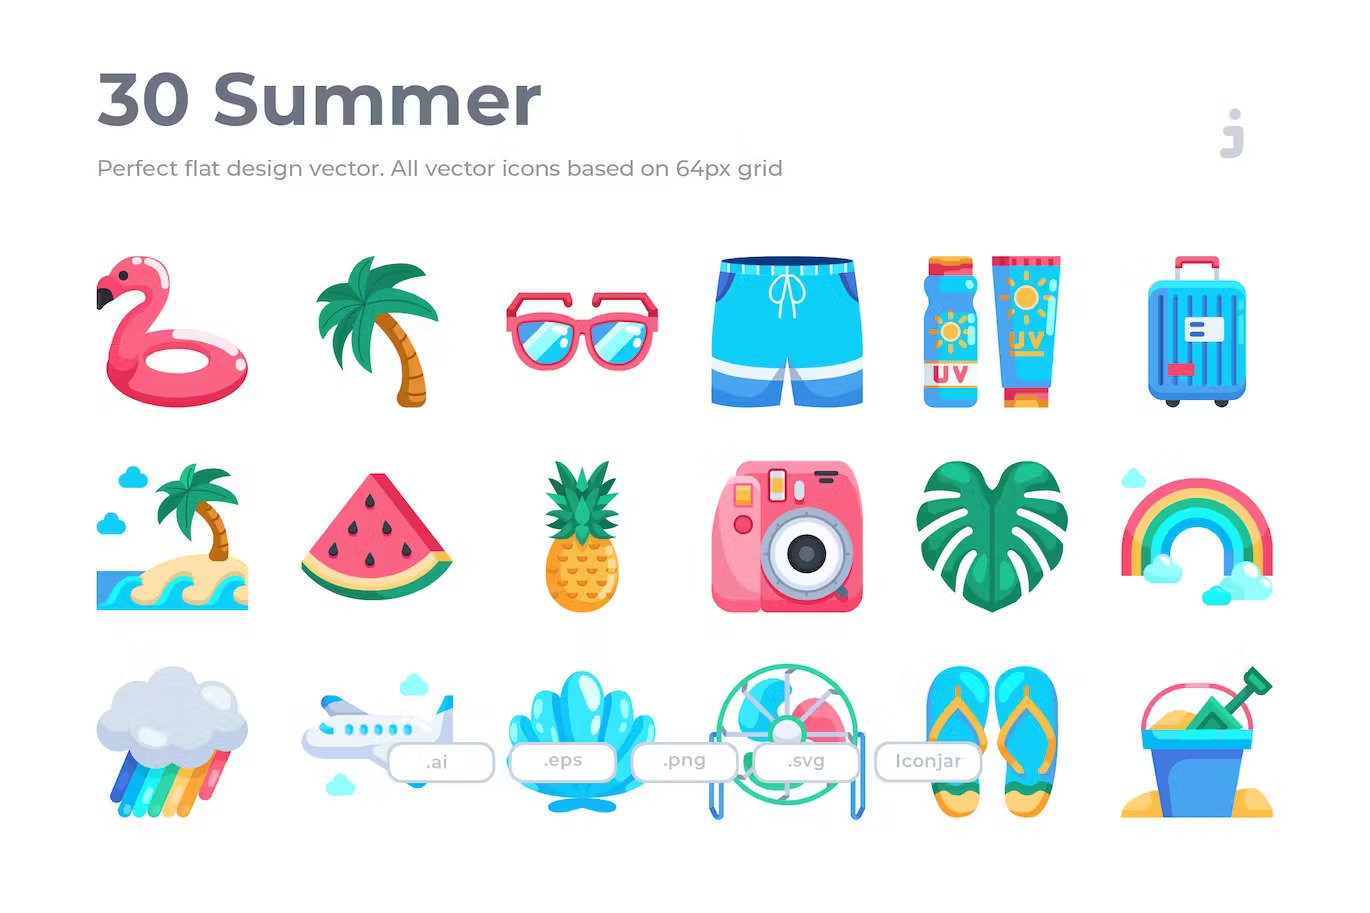 A flat style summer icon set